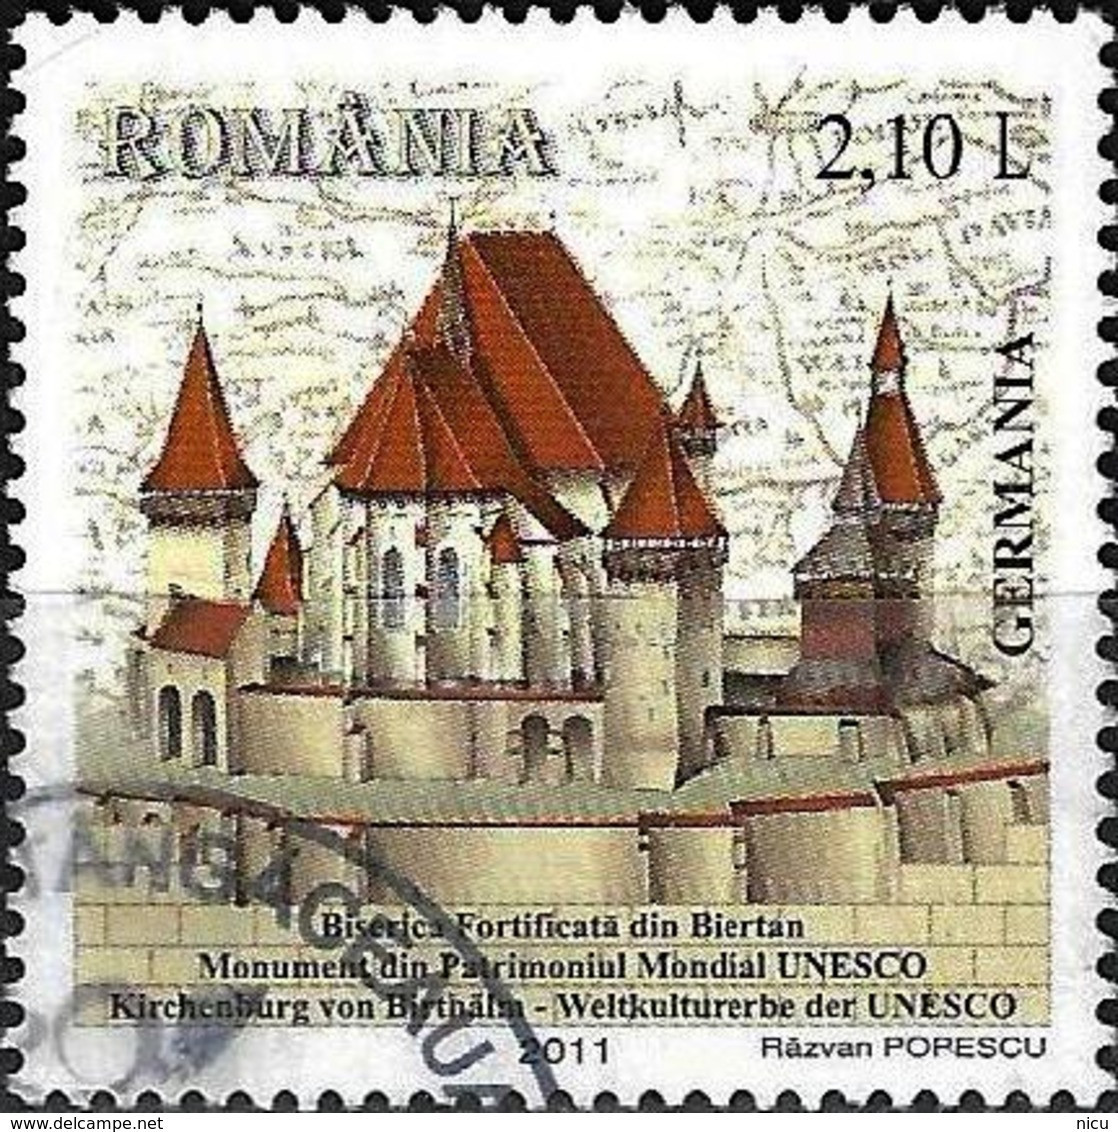 2011 - COMMON ISSUE ROMANIA - GERMANY - FORTIFIED CHURCH FROM BIERTAN - Usado